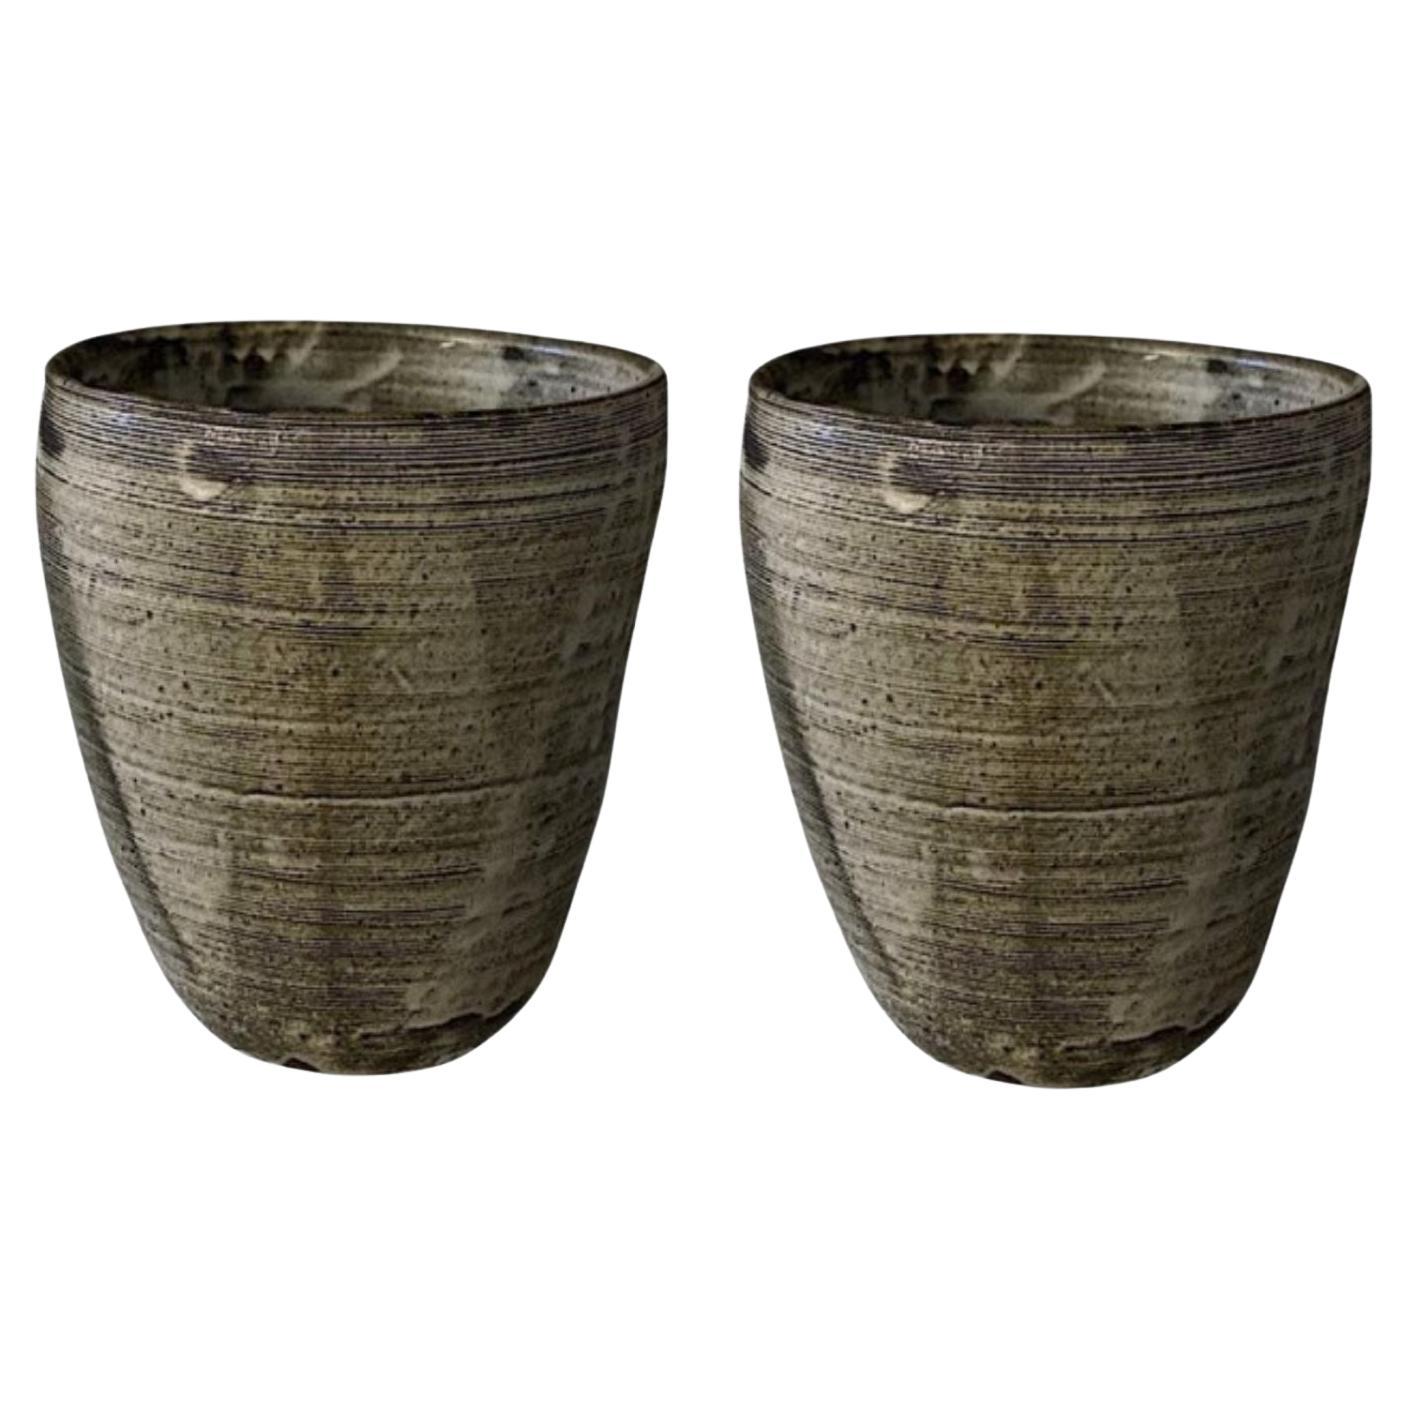 Set of 2 Handcrafted Vases #2 by Teppei Ono For Sale